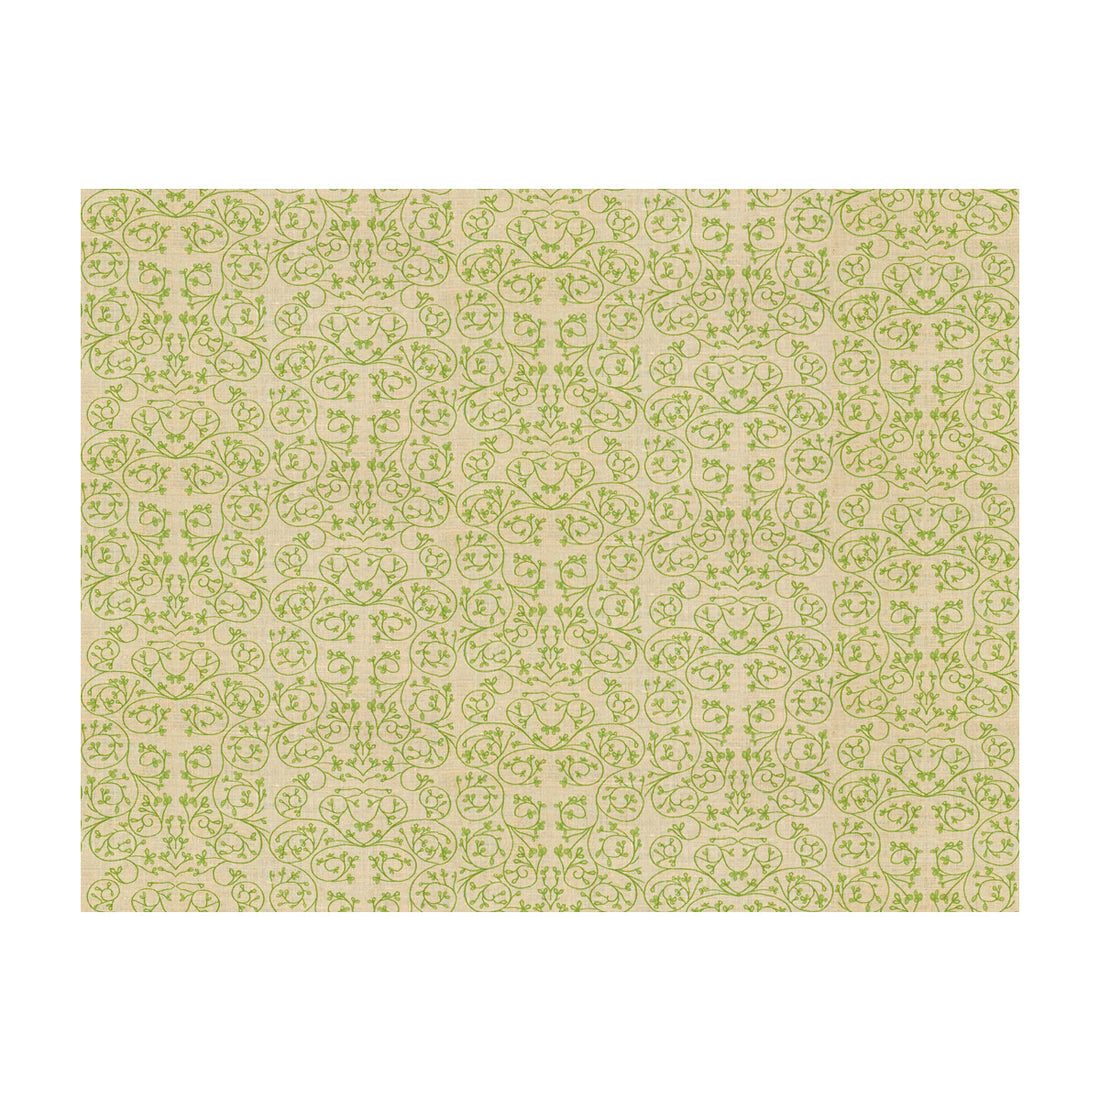 Garden fabric in meadow color - pattern GWF-3511.3.0 - by Lee Jofa Modern in the Allegra Hicks Garden collection